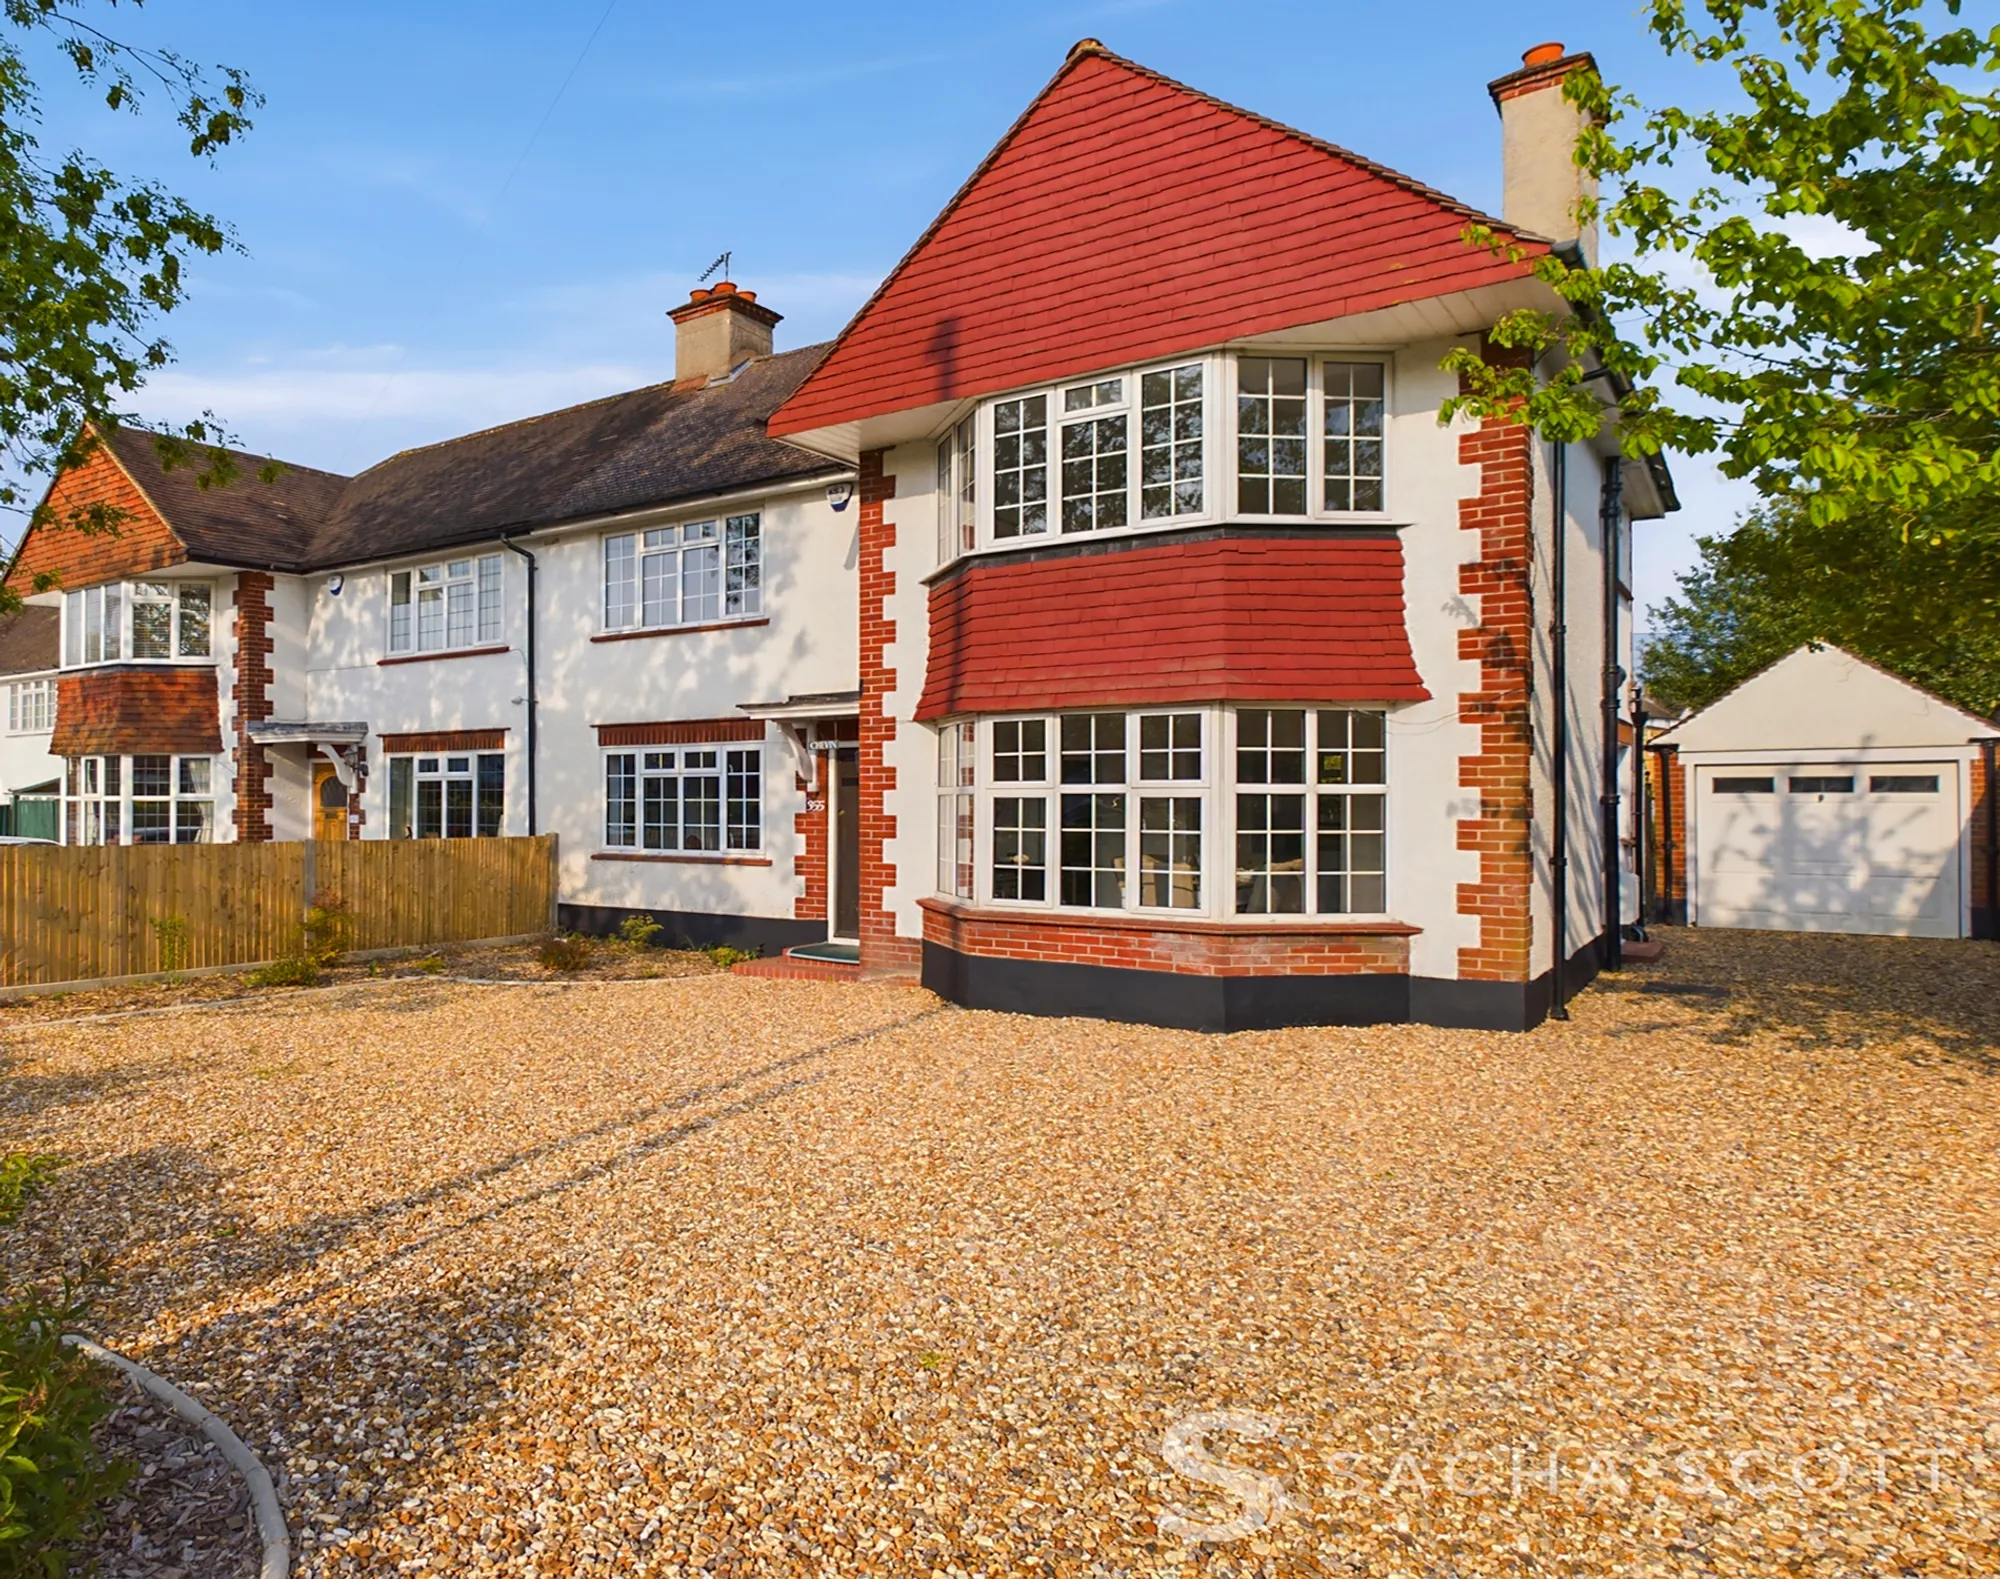 3 bed semi-detached house for sale in Reigate Road, Epsom - Property Image 1